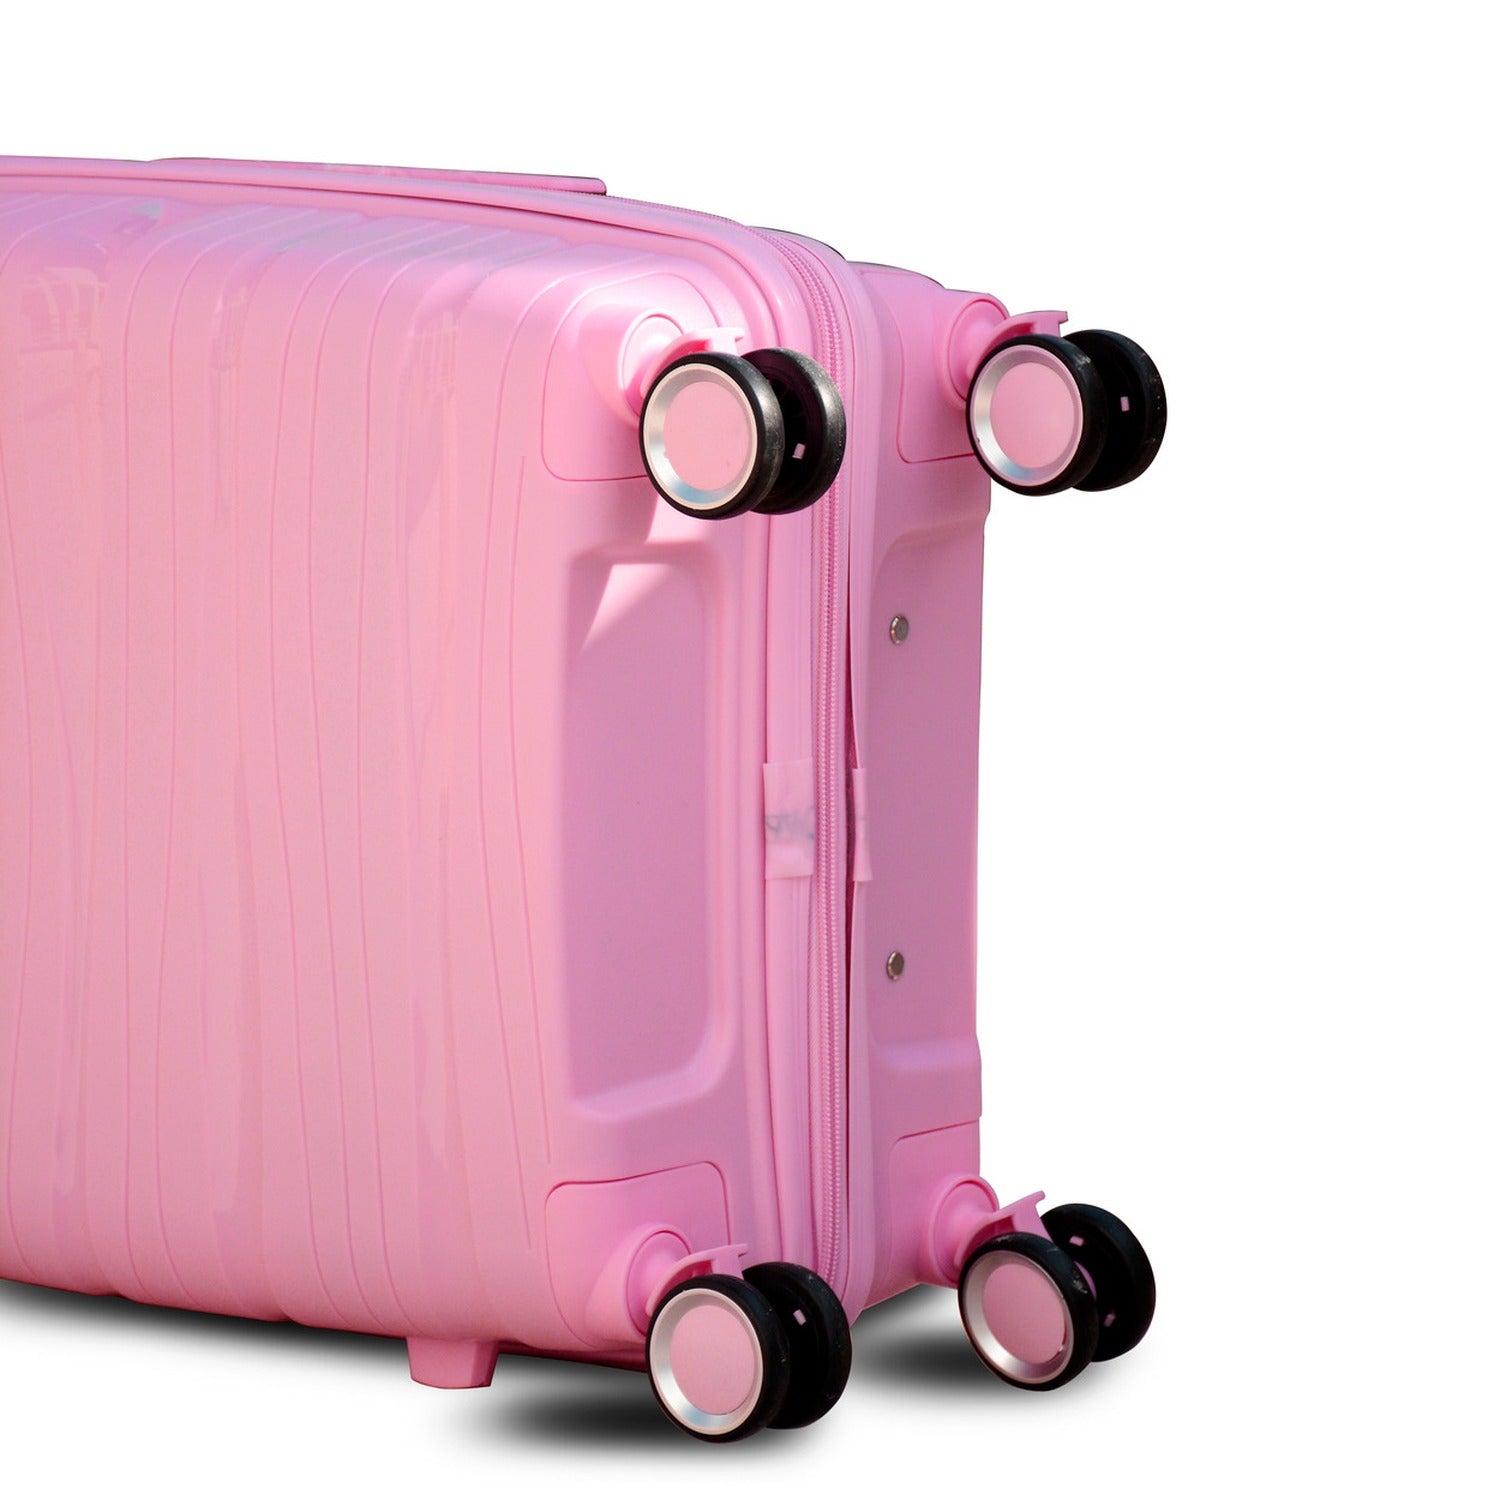 20" Pink Colour Royal PP Luggage Lightweight Hard Case Carry On Trolley Bag with Double Spinner Wheel